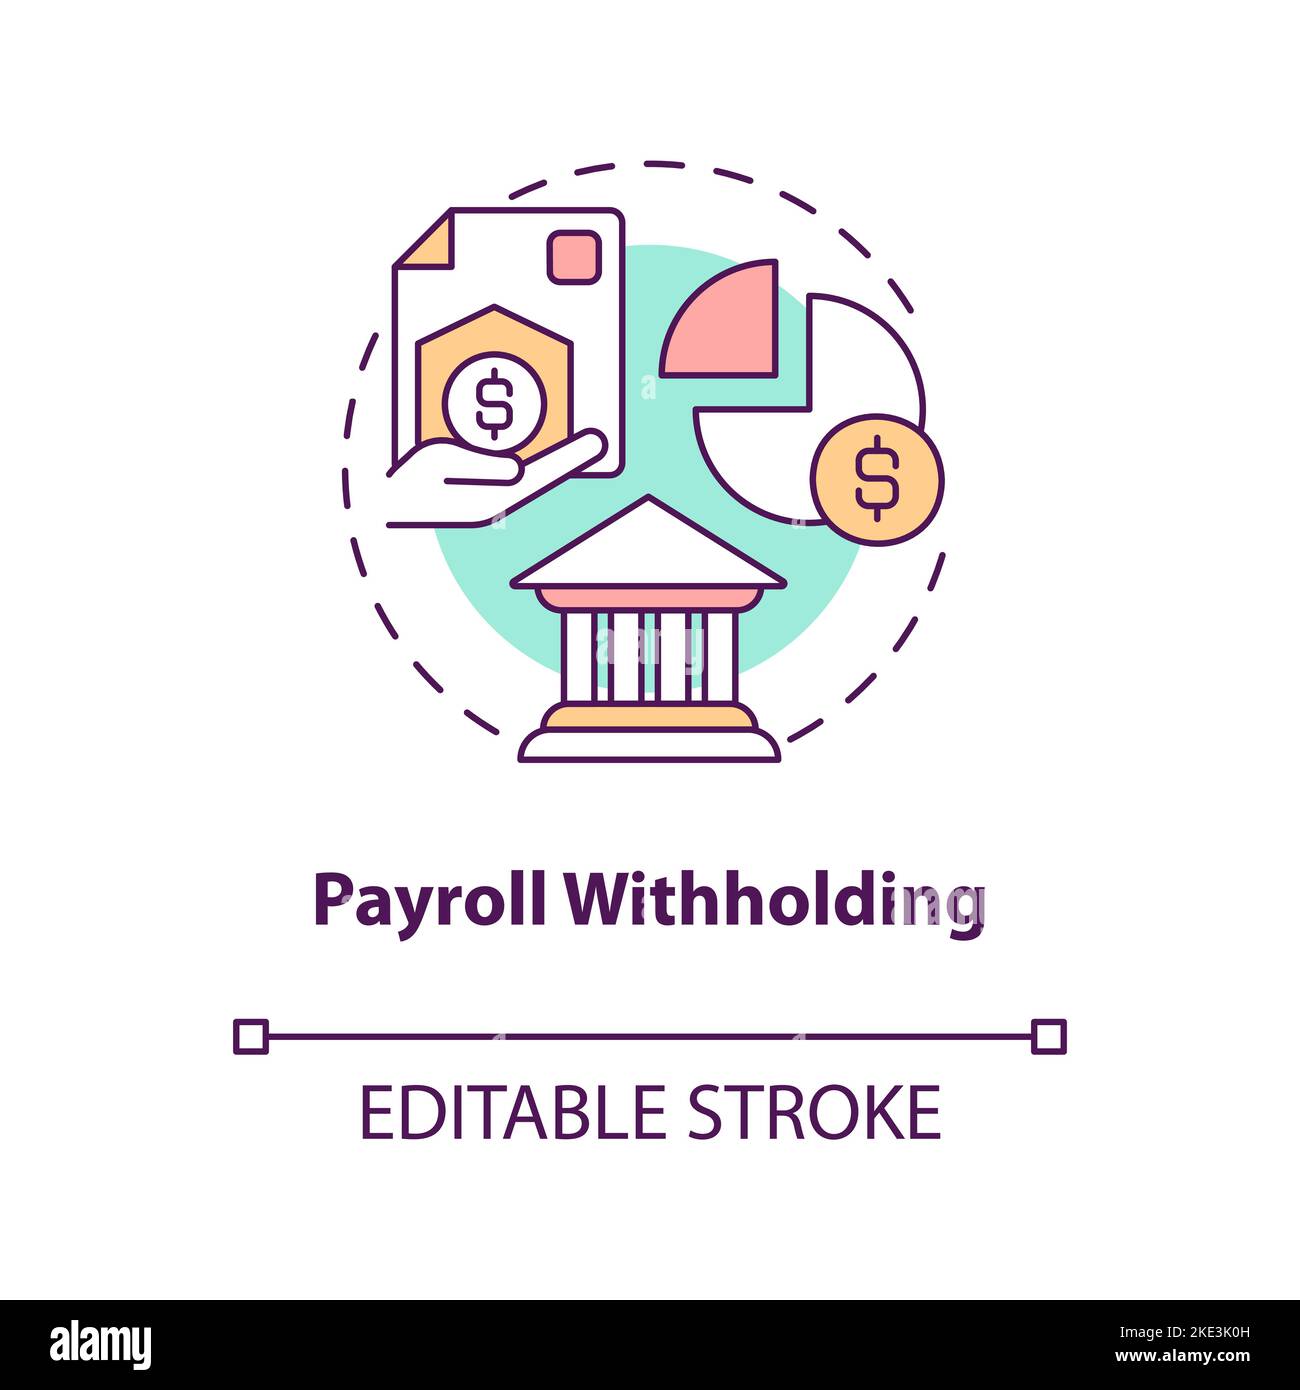 Payroll withholding concept icon Stock Vector